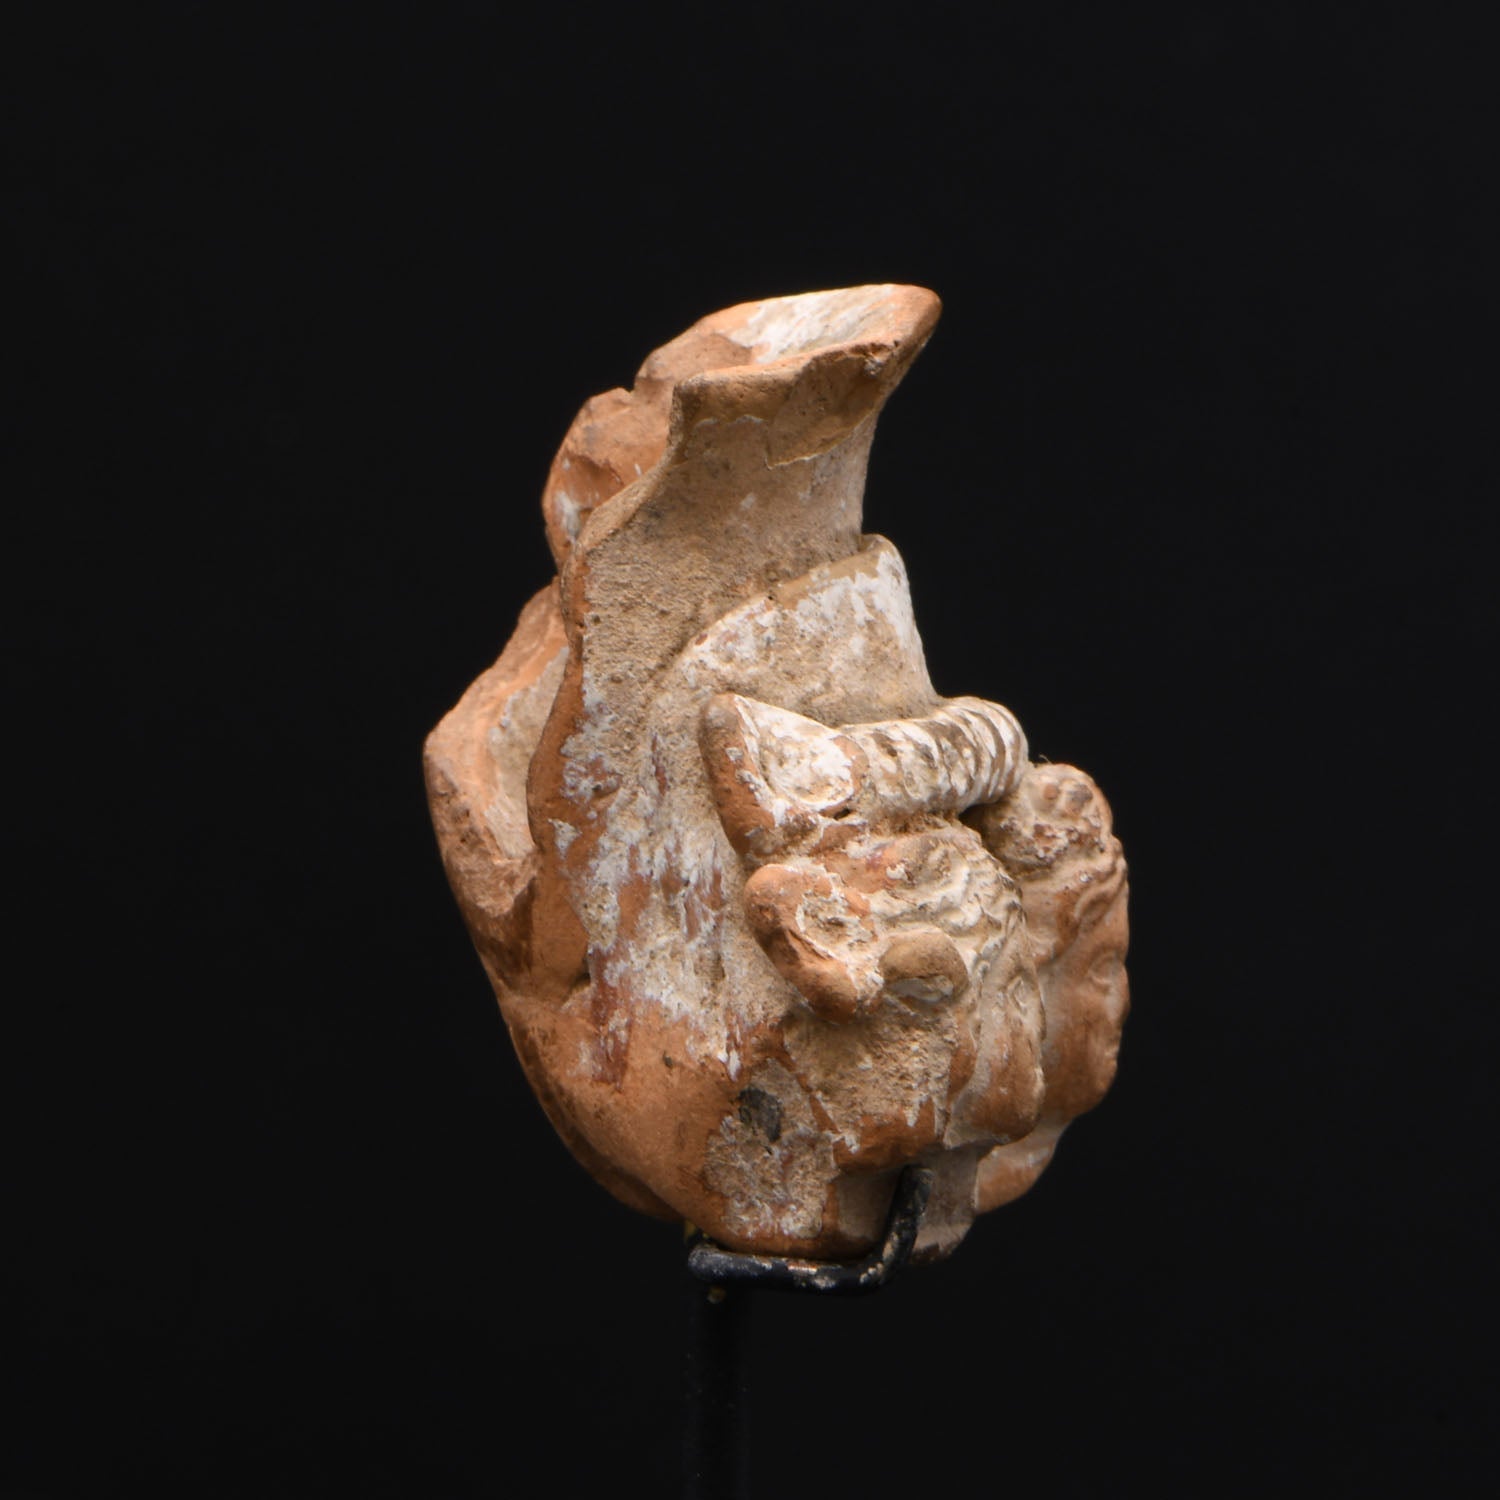 A Published Greek Ceramic Vase Mold Fragment, Hellenistic Period, ca. 3rd - 2nd century BCE